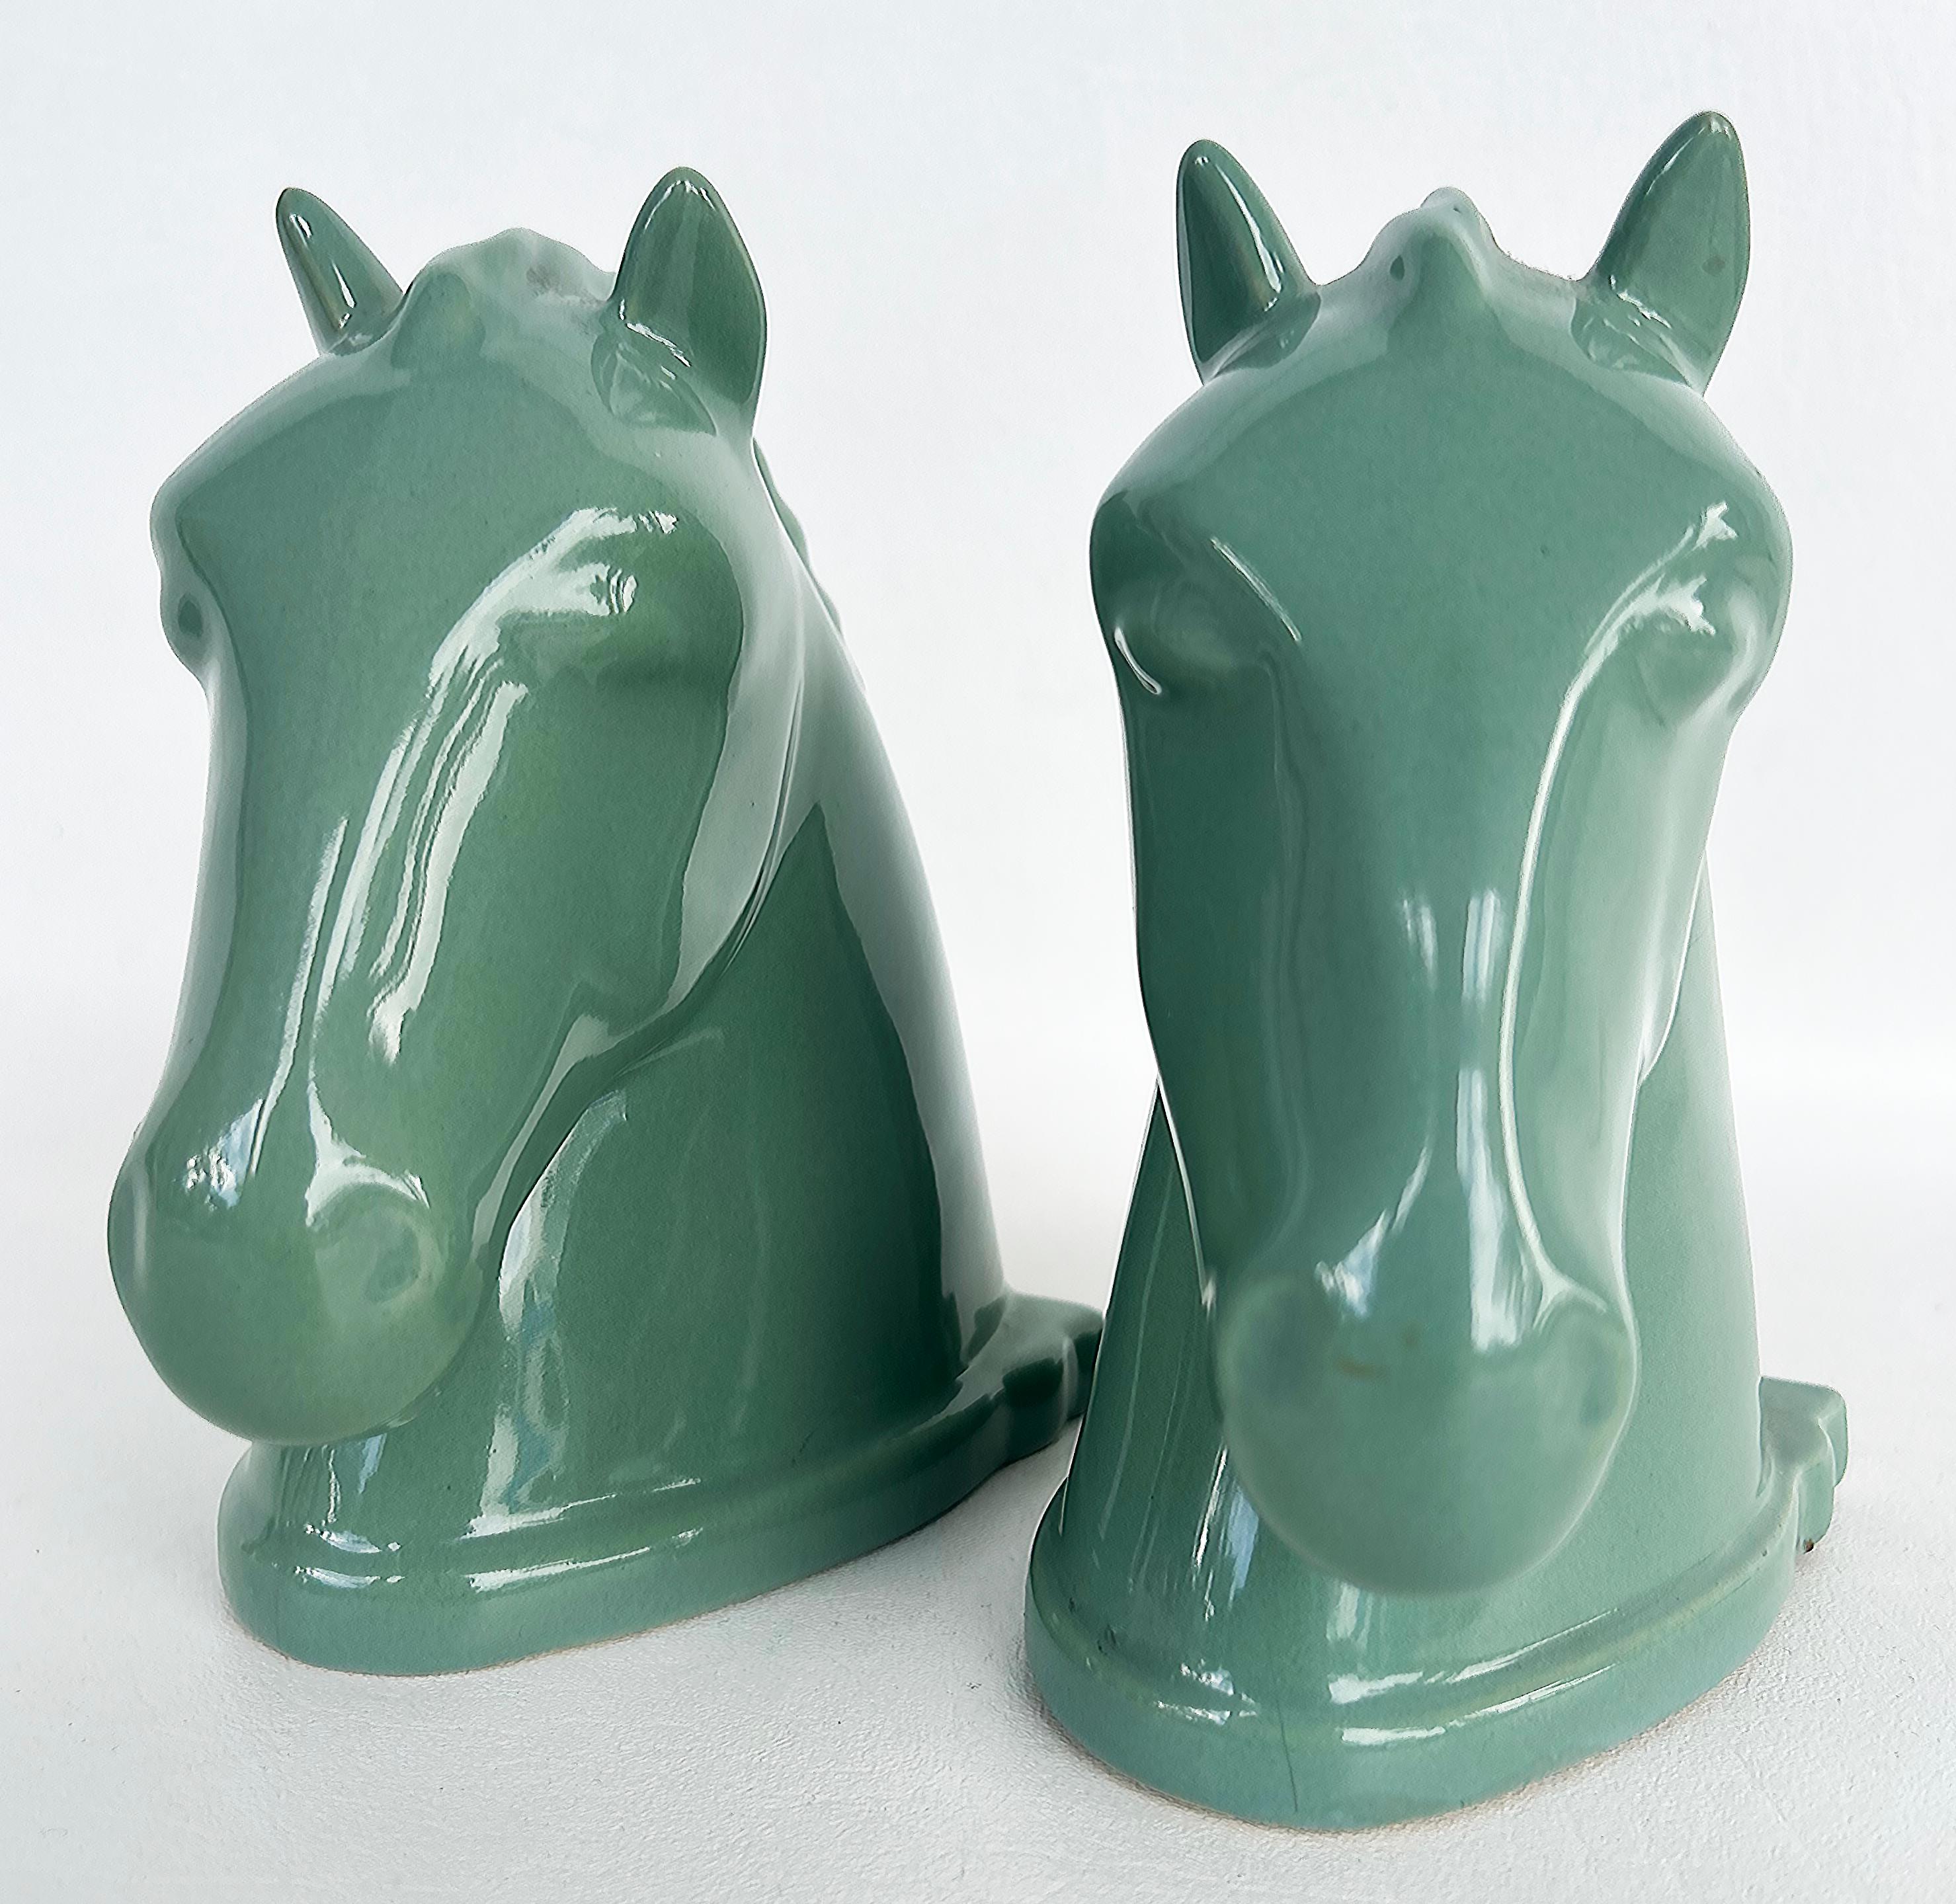 Vintage Abingdon USA Ceramic Horse Head Bookends with Labels, Pair 

Offered for sale is a pair of substantial early Mid-Century ceramic horse bookends from Abingdon Pottery. The horses are glazed in green which is an uncommon color for Abingdon. 